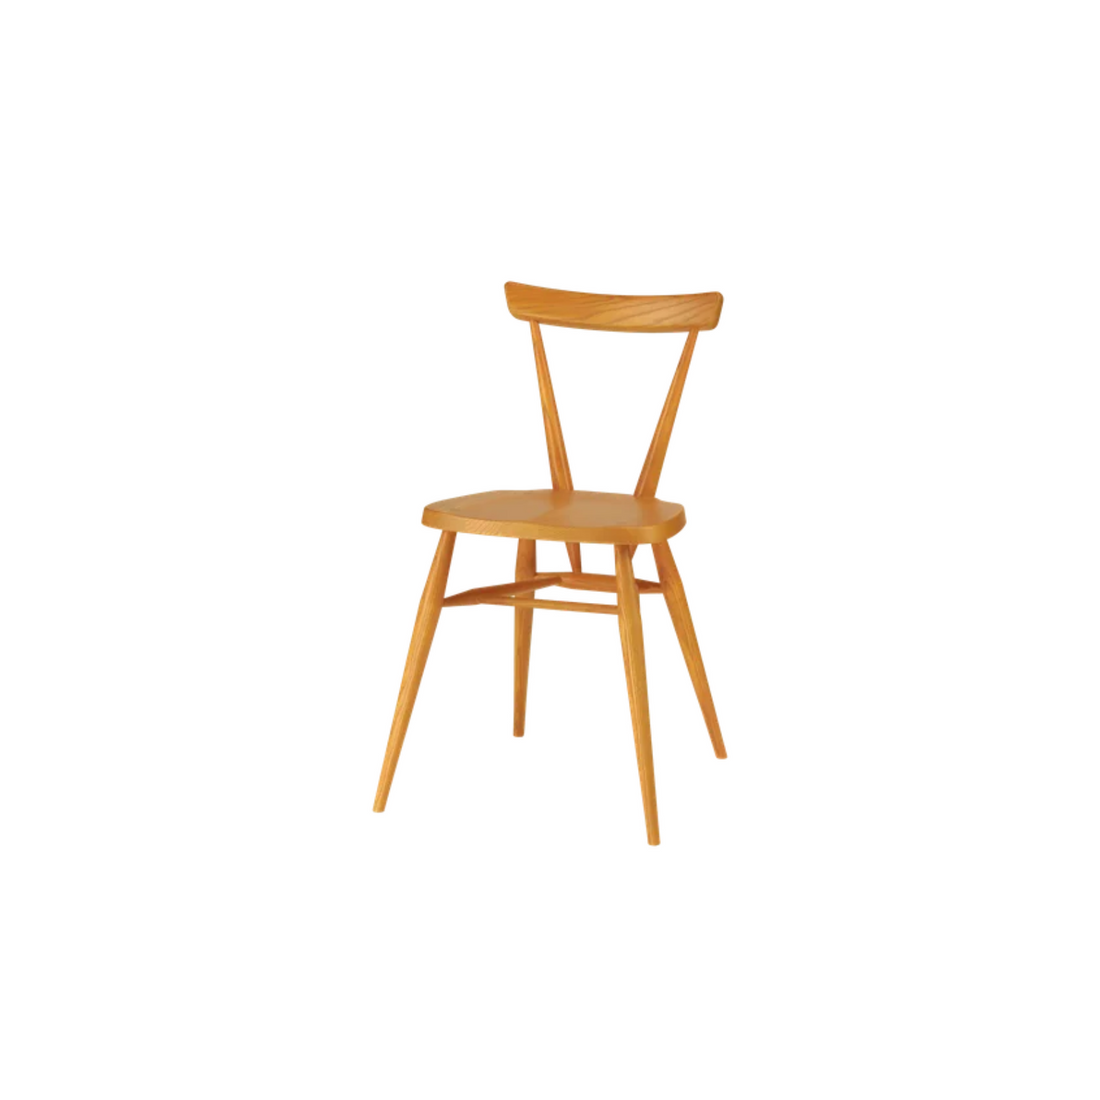 Stacking Chair in Ochre Wood finish by L.ercolani